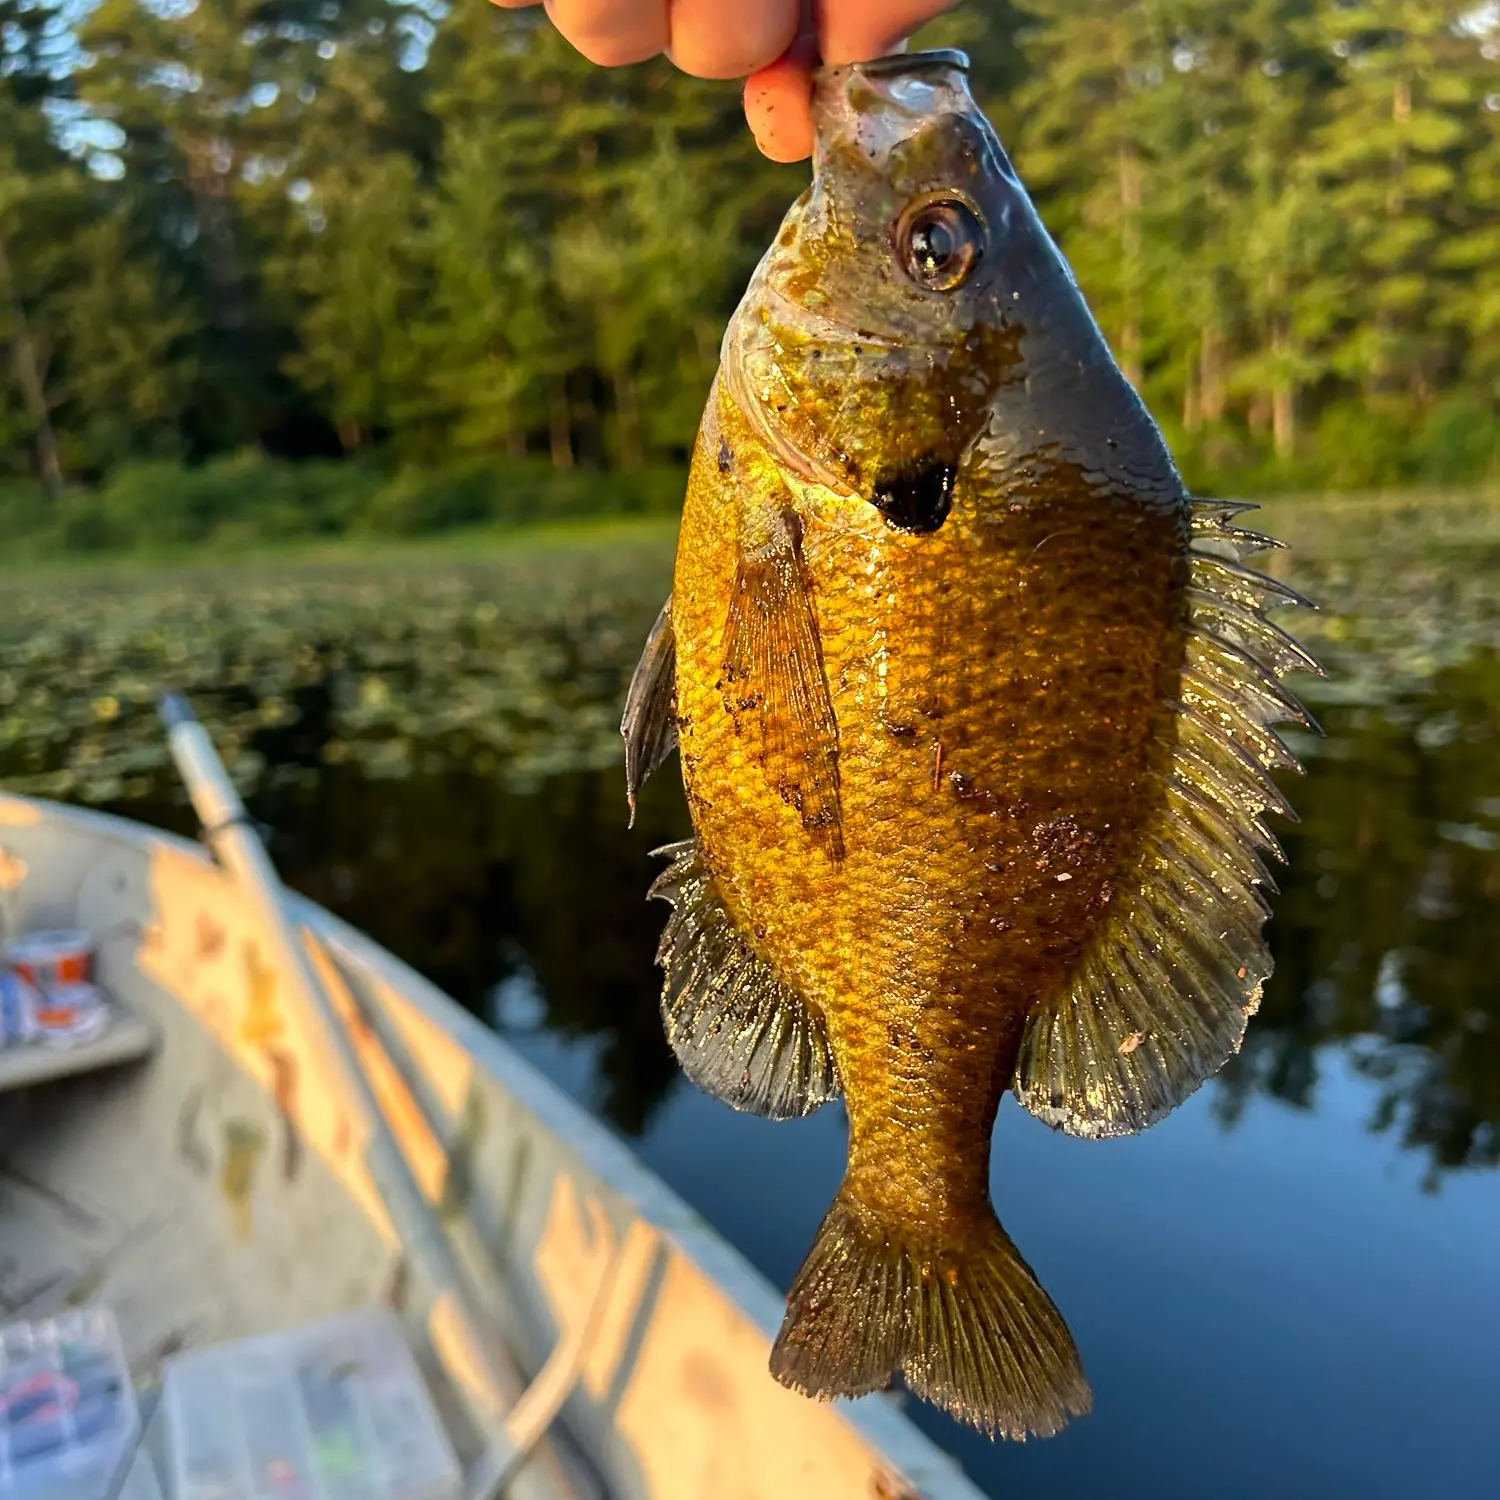 We have some absolute chonky boi Bluegill in our little backyard pond. WNY  : r/Fishing